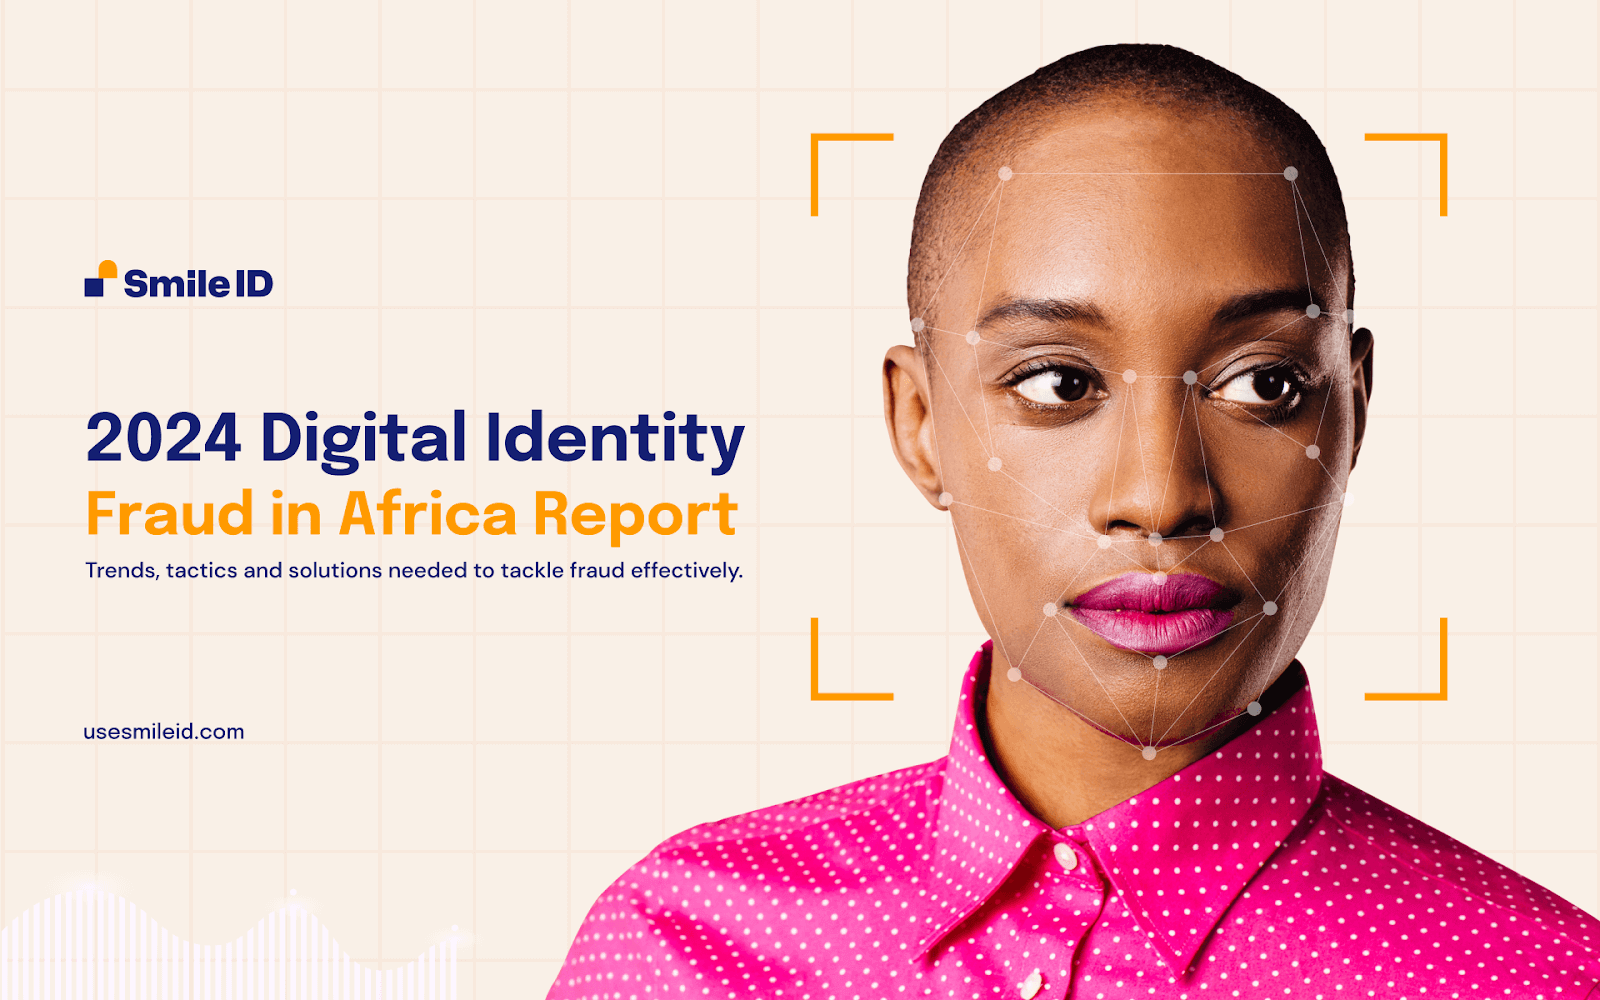 Smile ID hits 100 million verification landmark; launches inaugural analysis on identity fraud in Africa